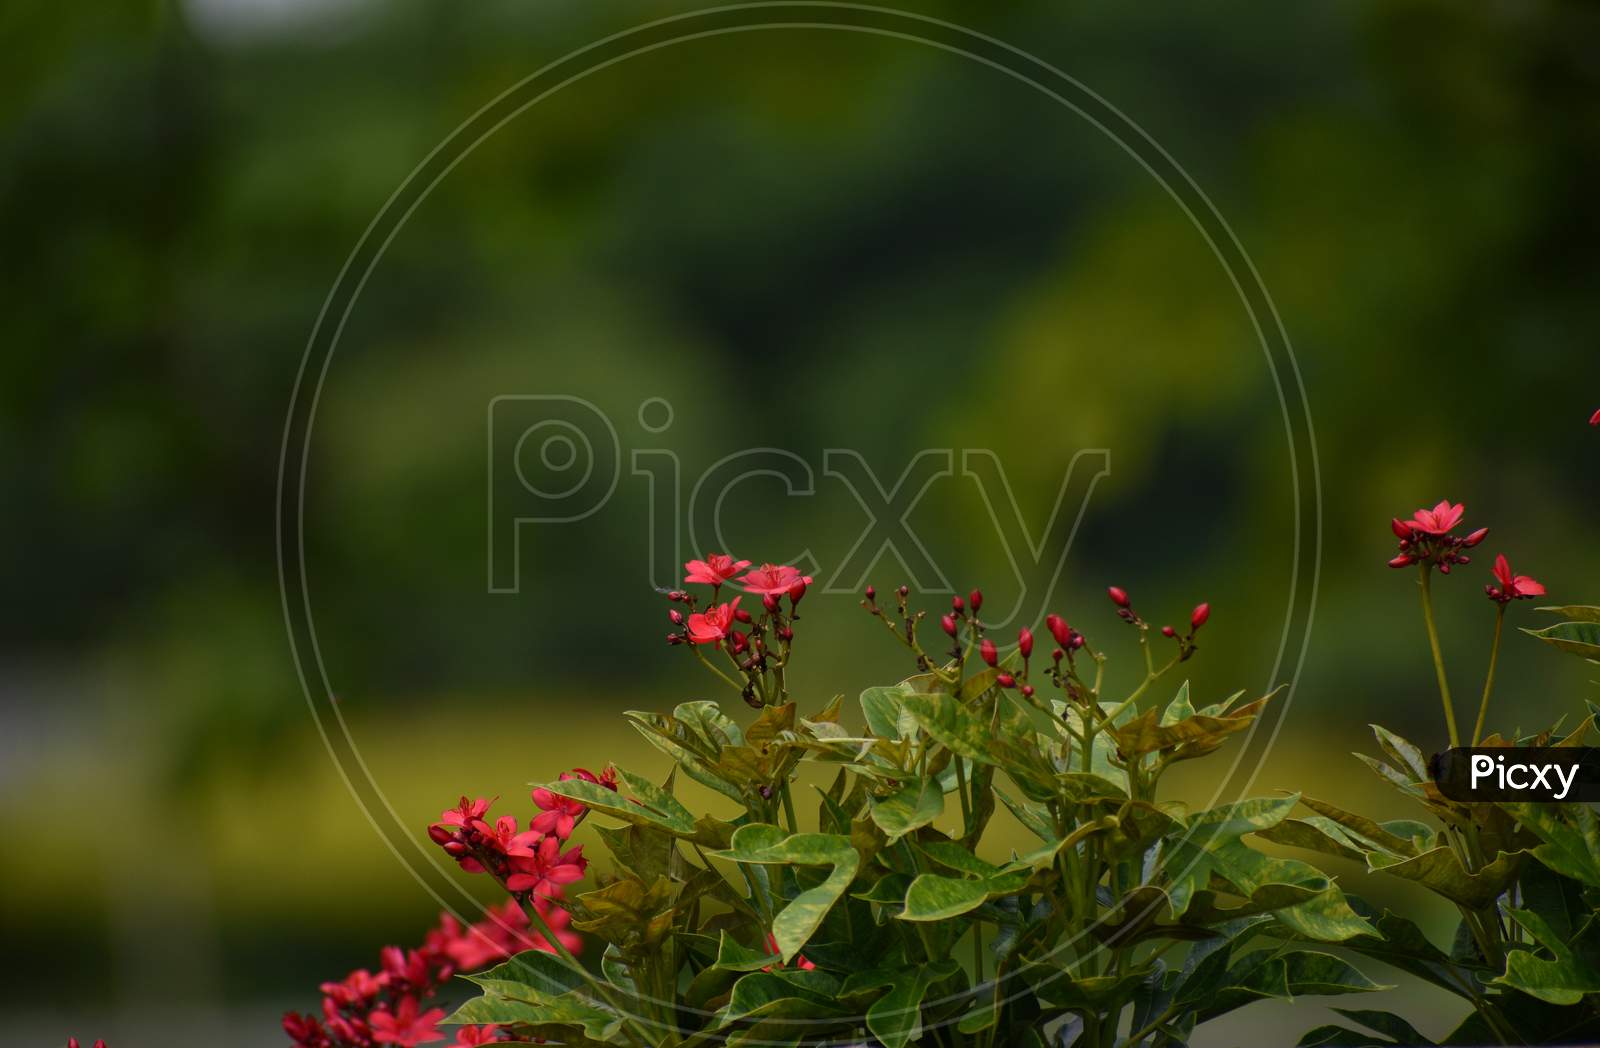 Small red flowers and greenery wallpaper